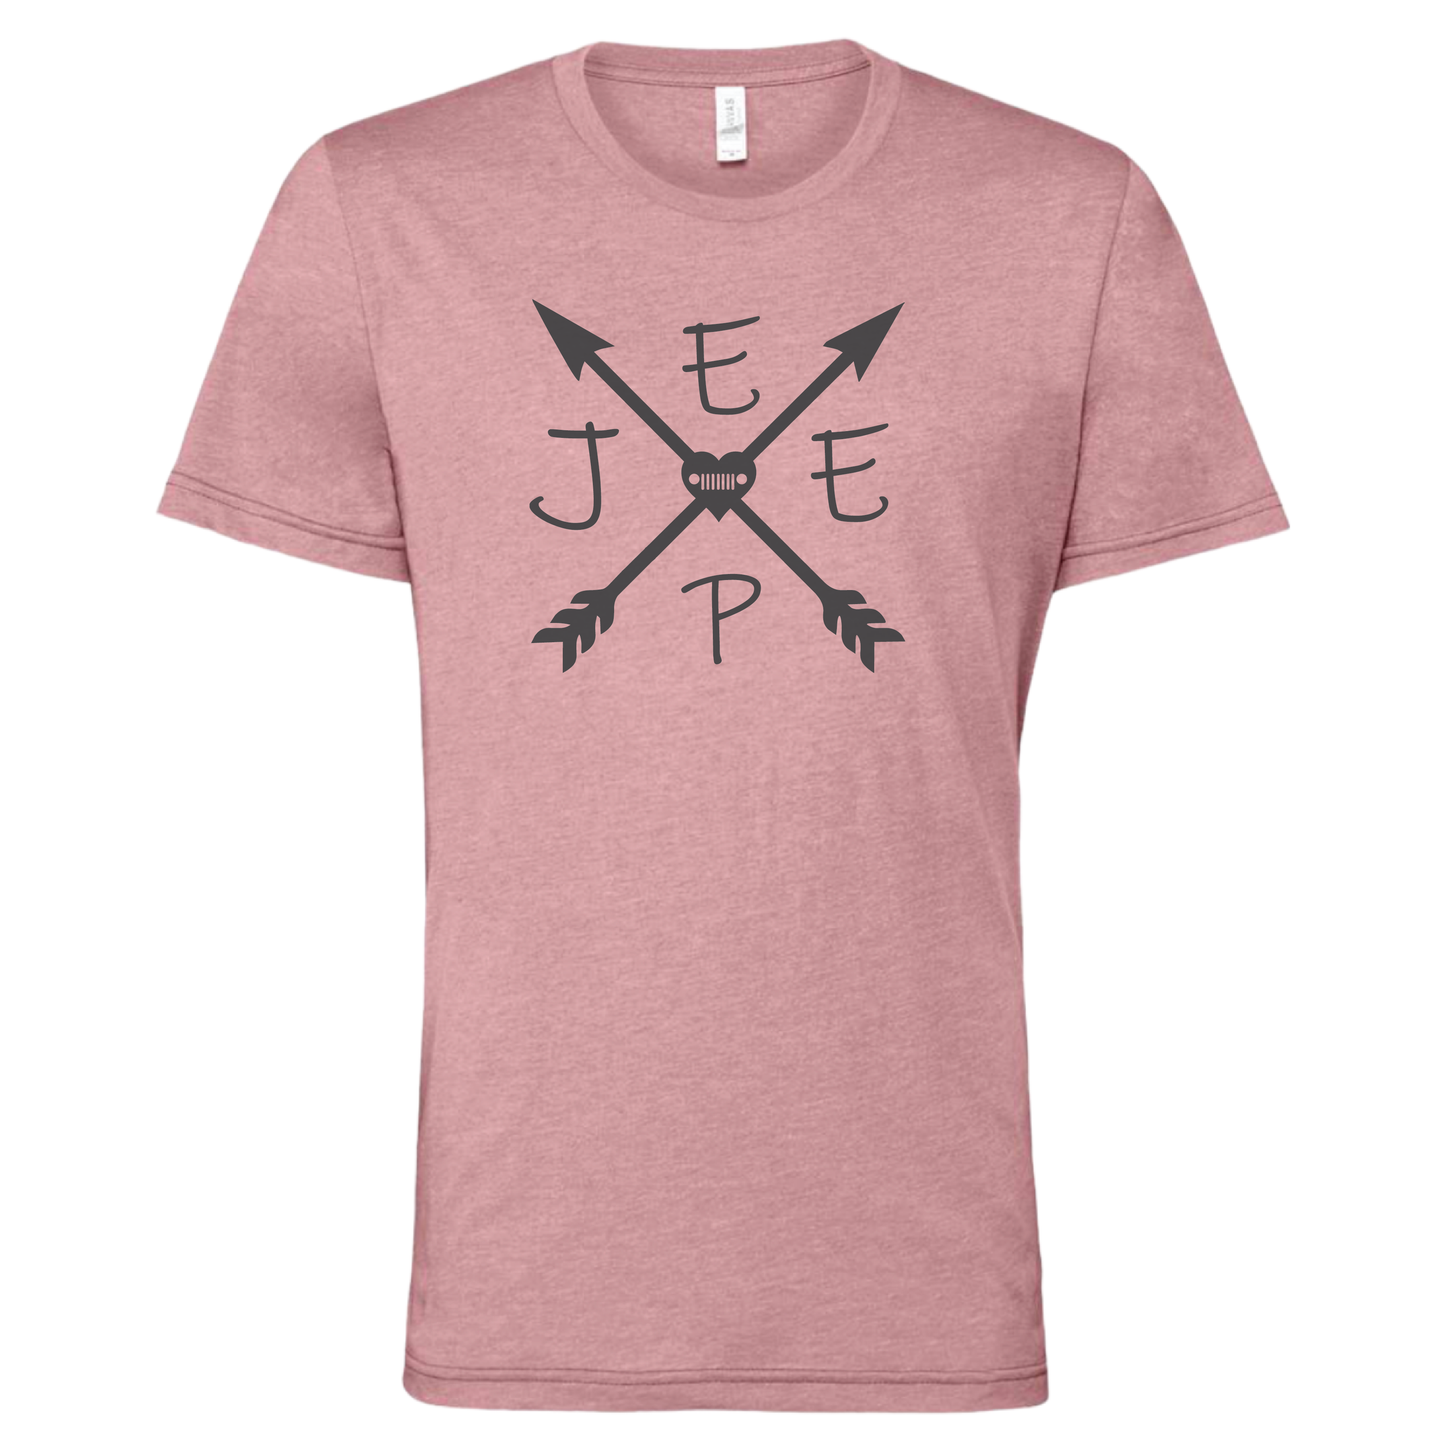 Arrow - Shirt, Tank Top, Long Sleeve or Hoodie - Available in Multiple Colors